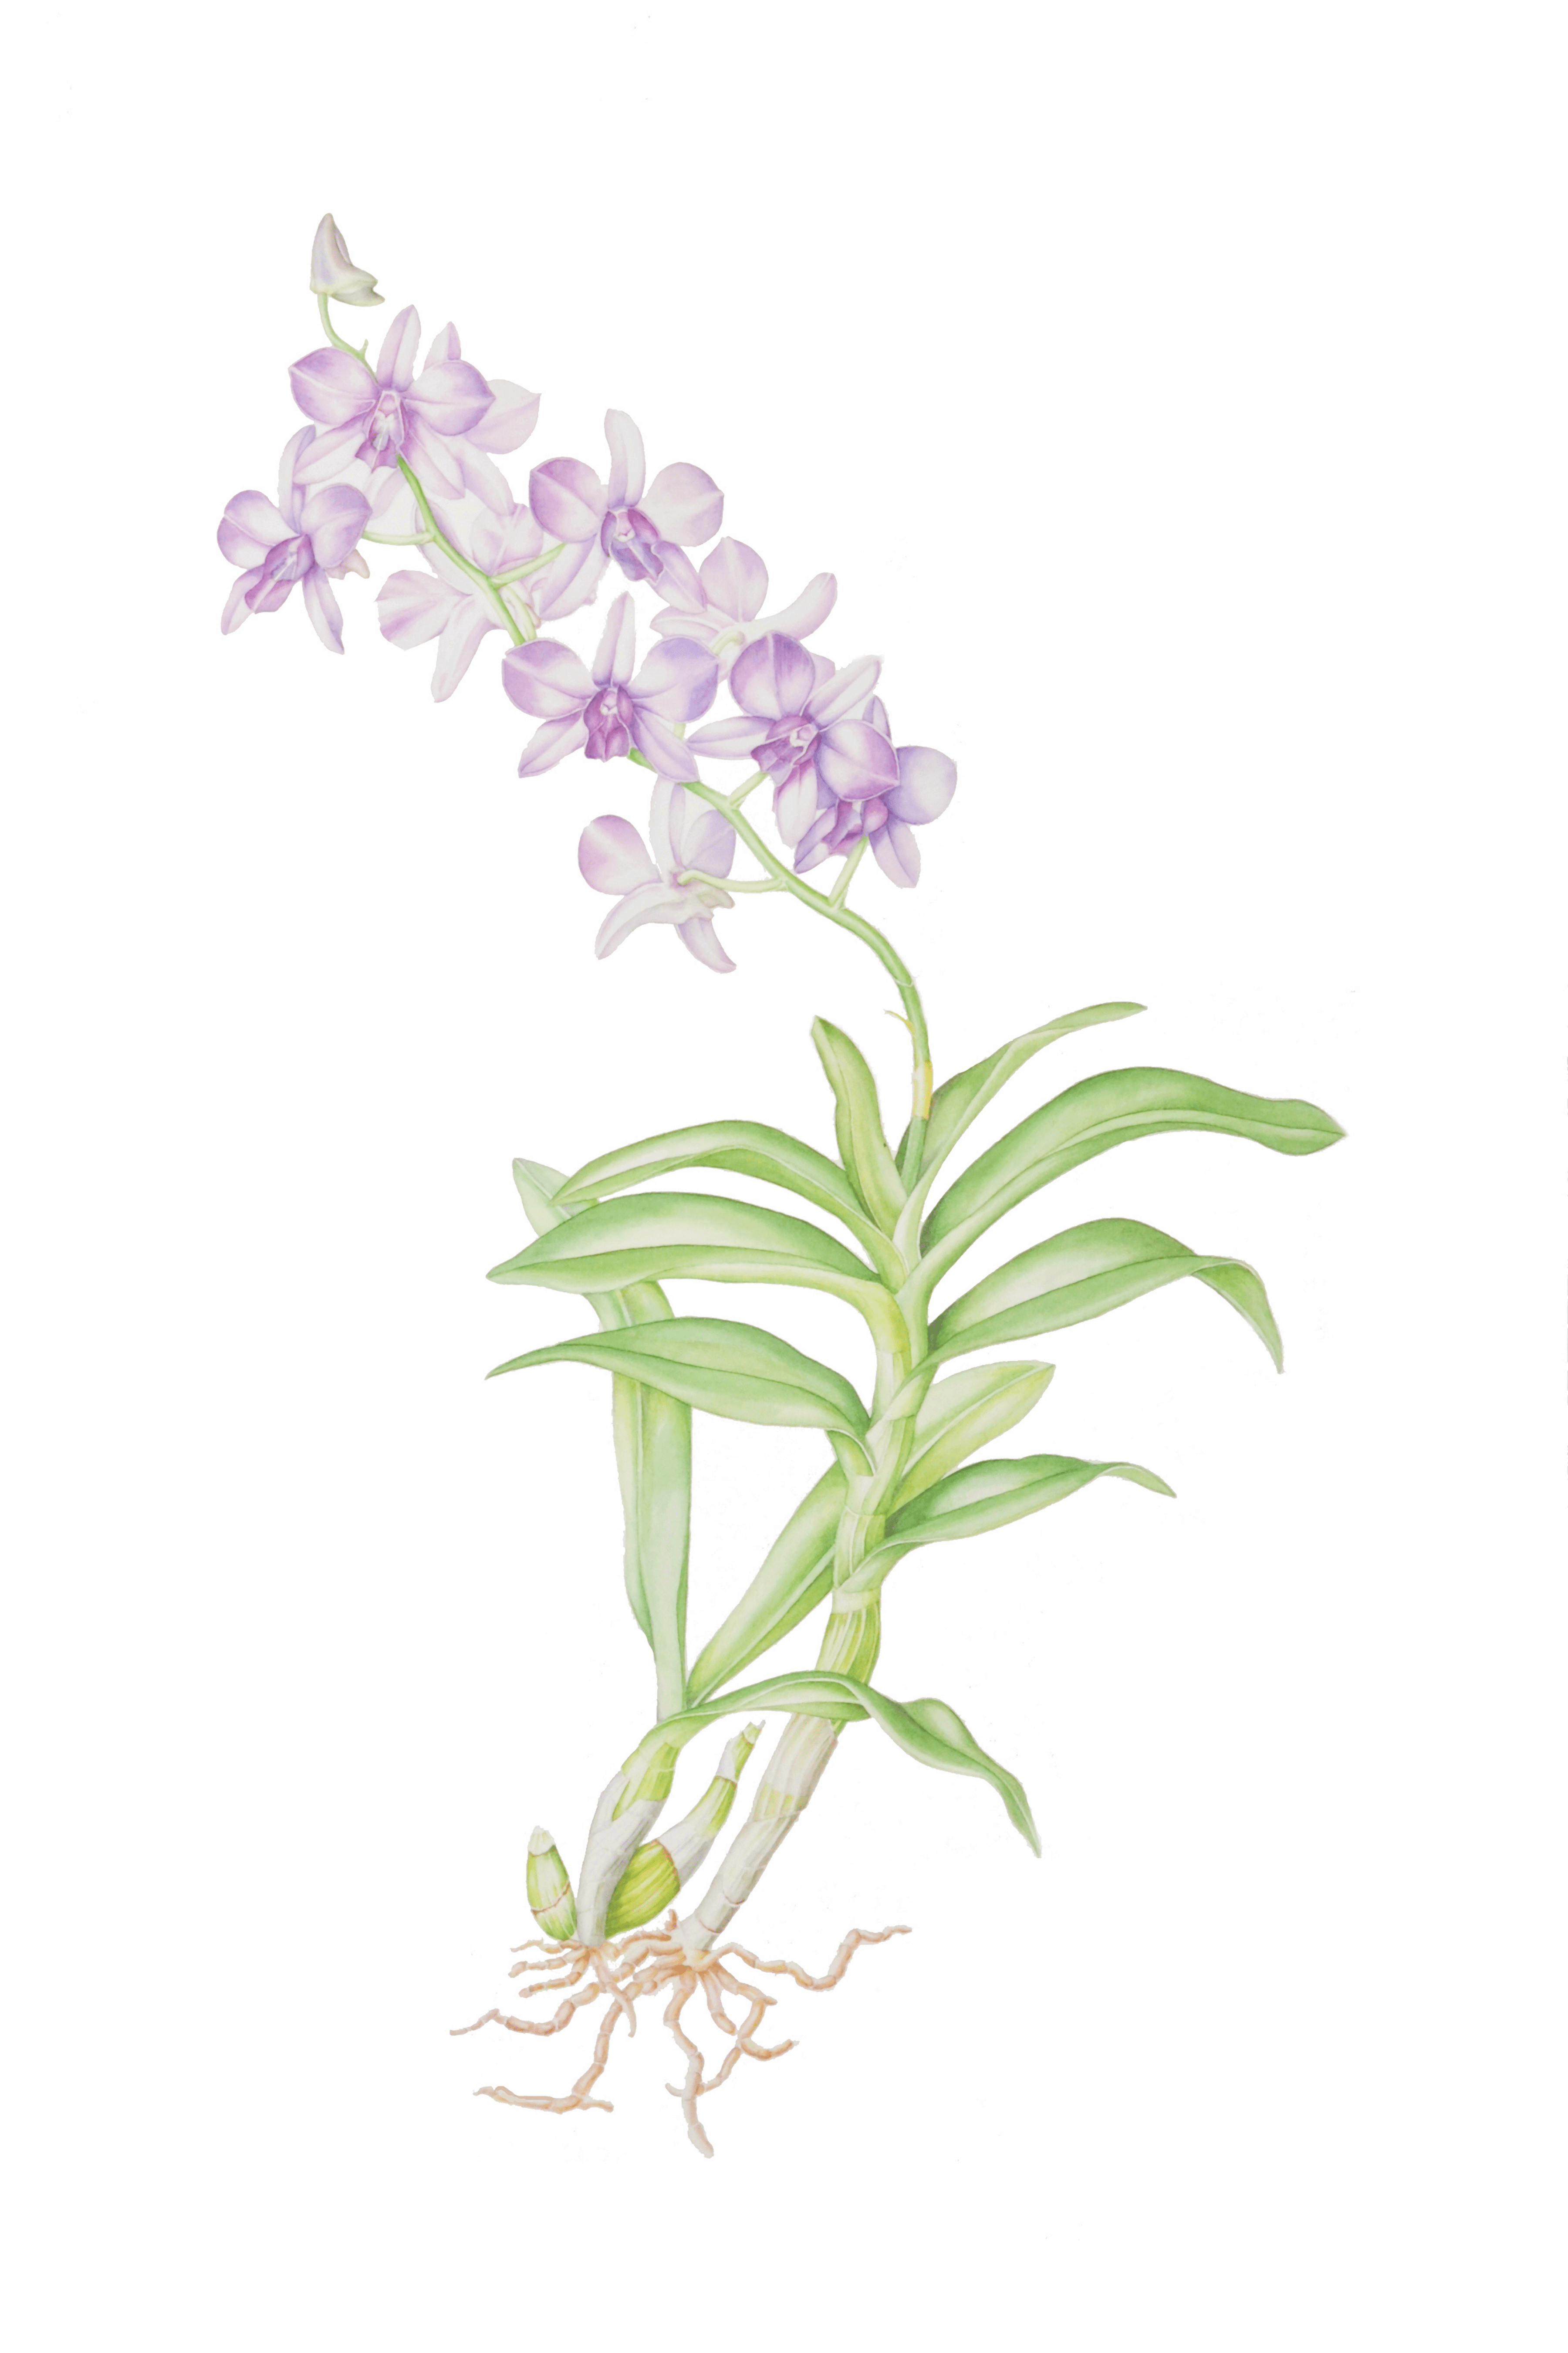 Our botanical illustration exhibit includes art from students and staff